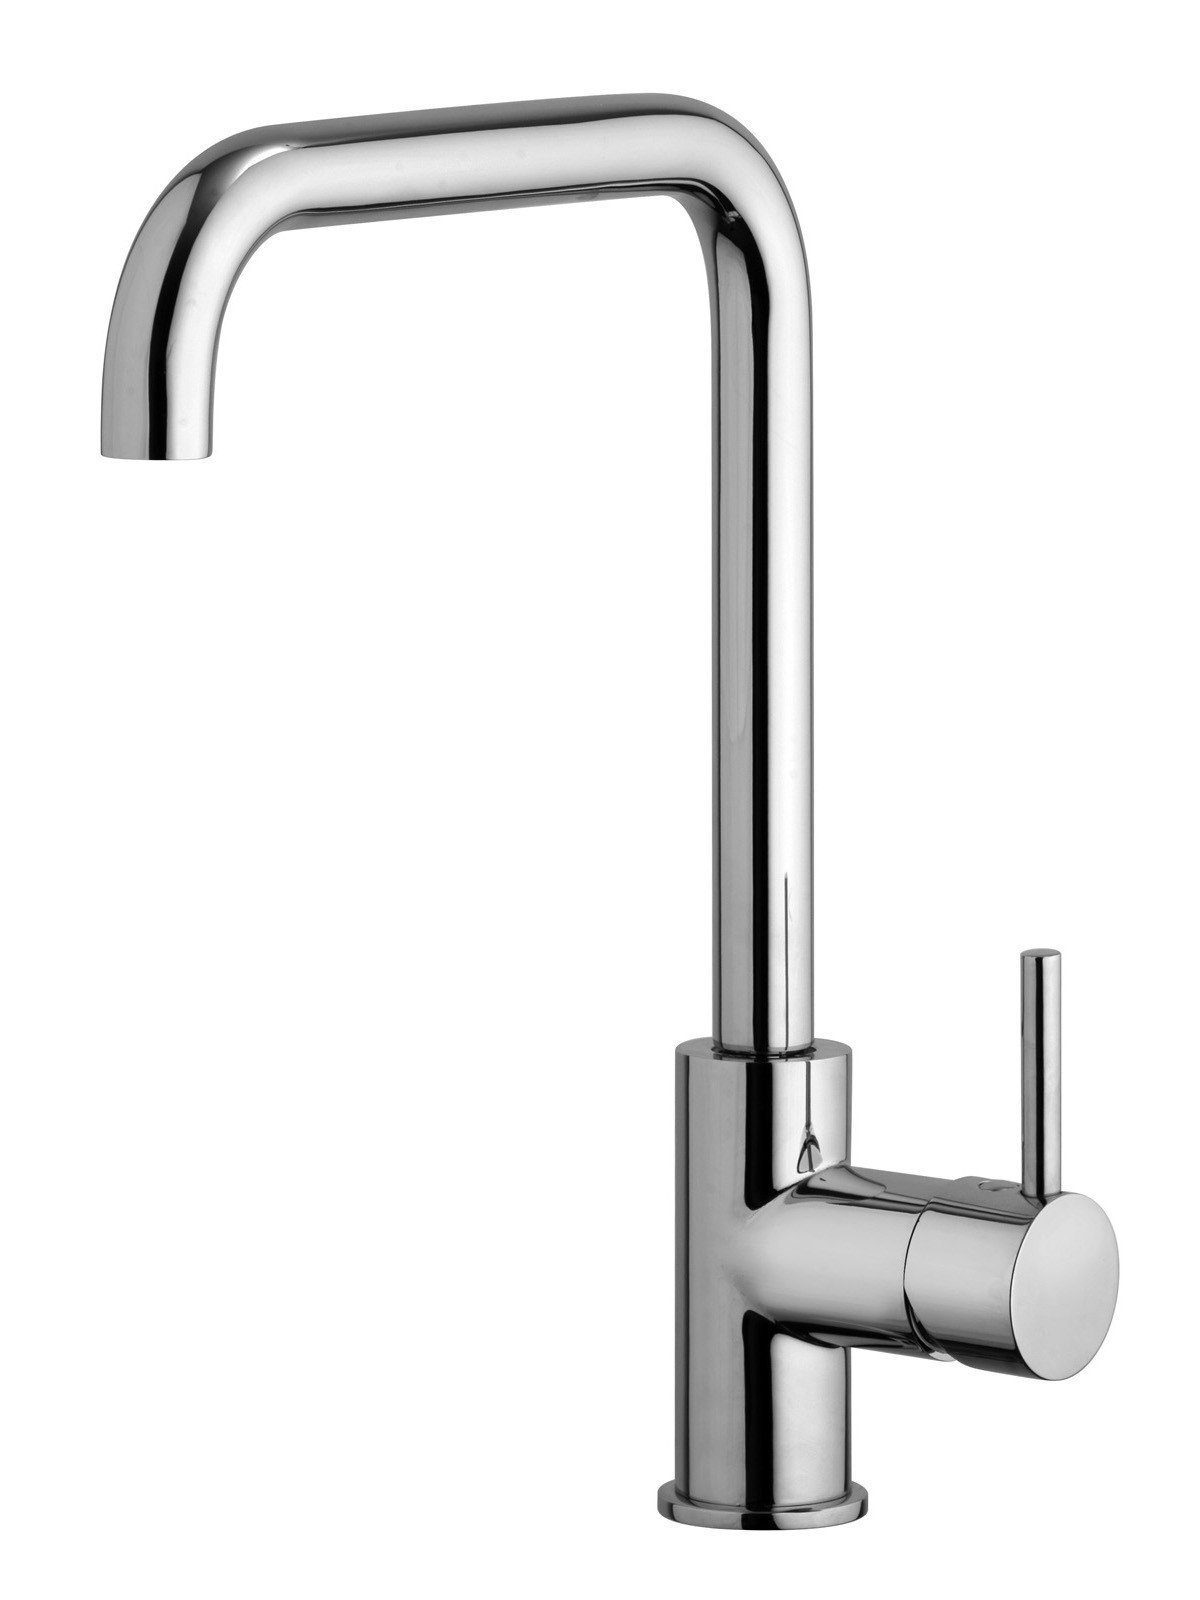 High version single-lever sink mixer with swivel spout